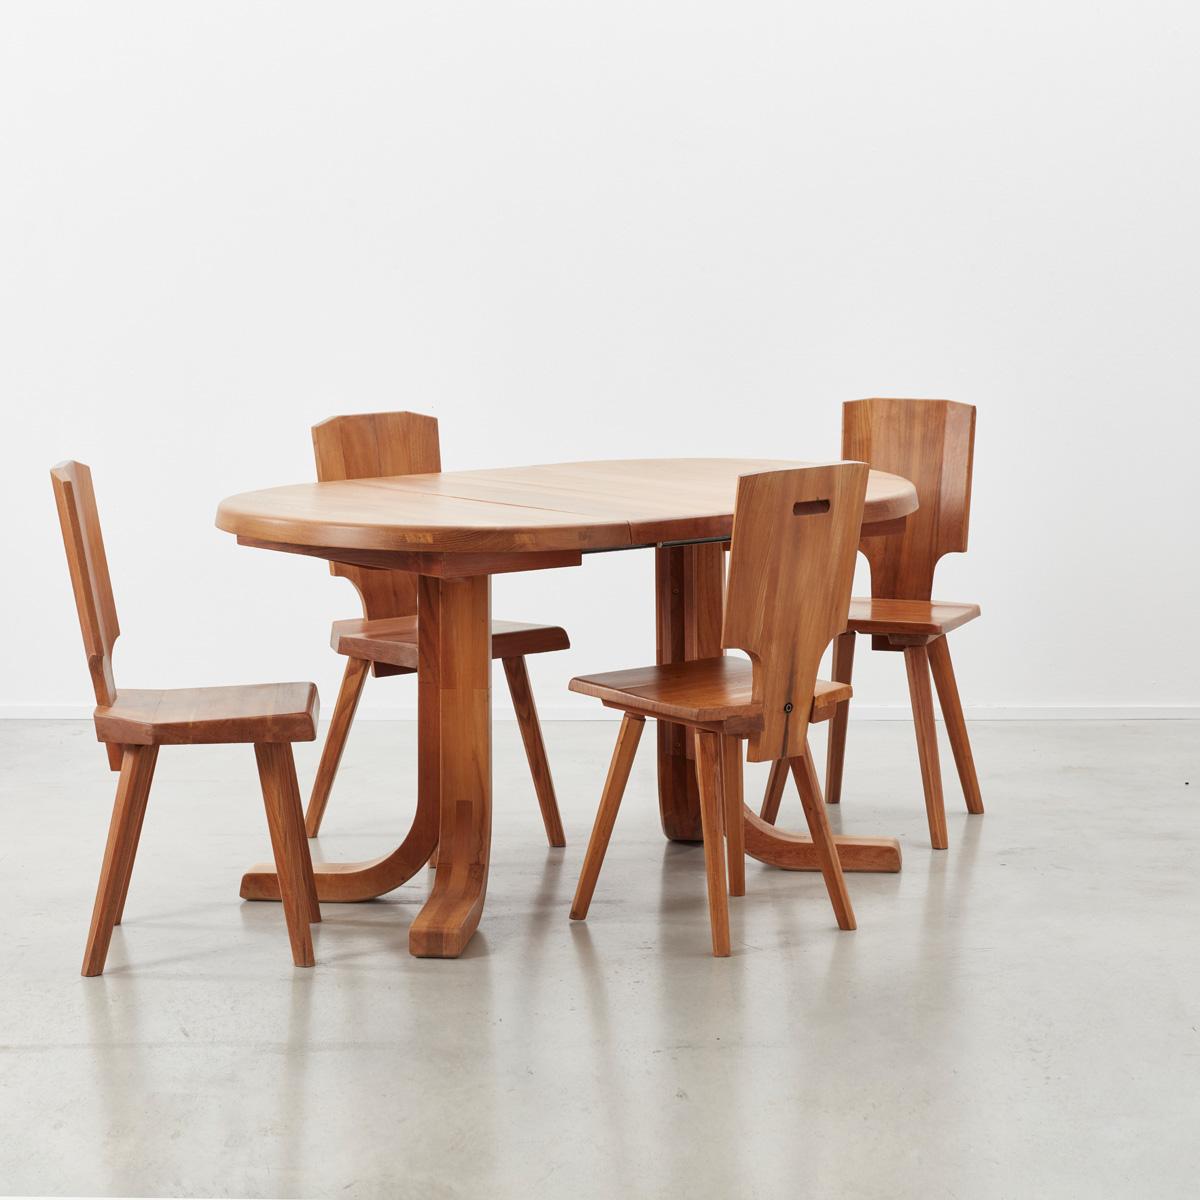 Set of four Pierre Chapo S28 early production dining chairs made from solid elmwood, designed in 1972, produced late 20th century with matching extendable round-to-oval dining table.

The S28 was inspired by Chapo’s travels to Alsace. He wanted to